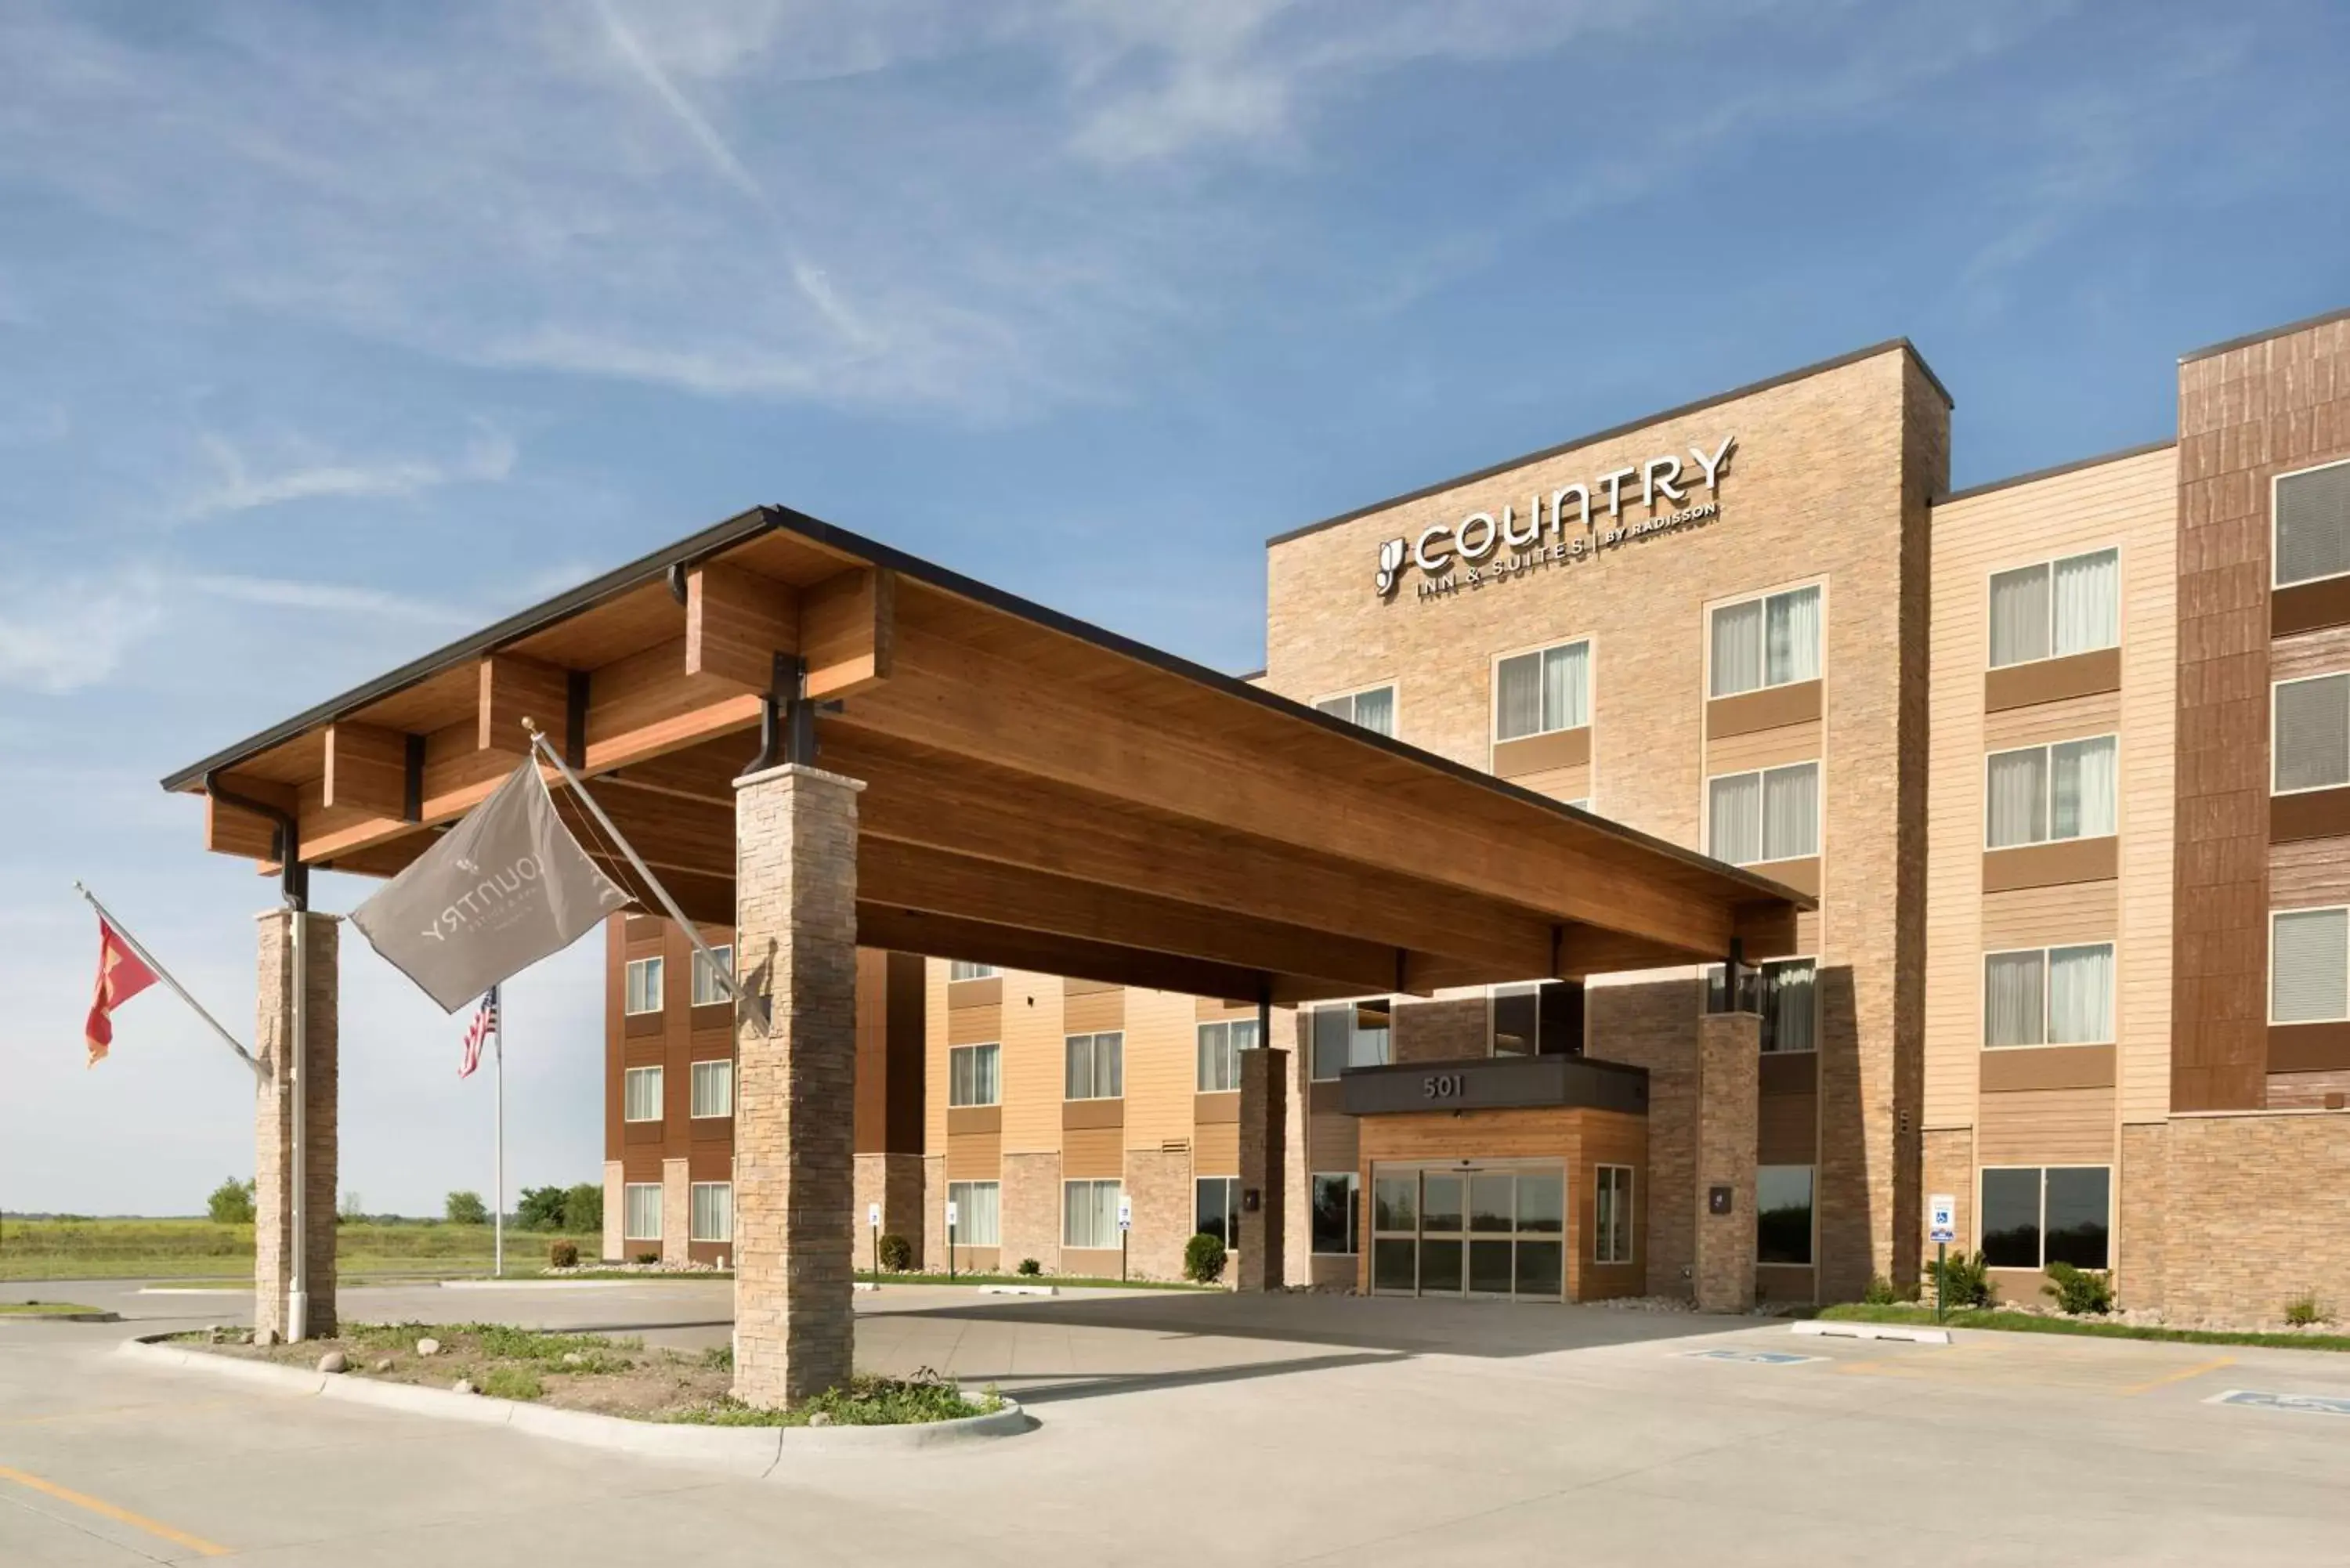 Property building in Country Inn & Suites by Radisson, Indianola, IA